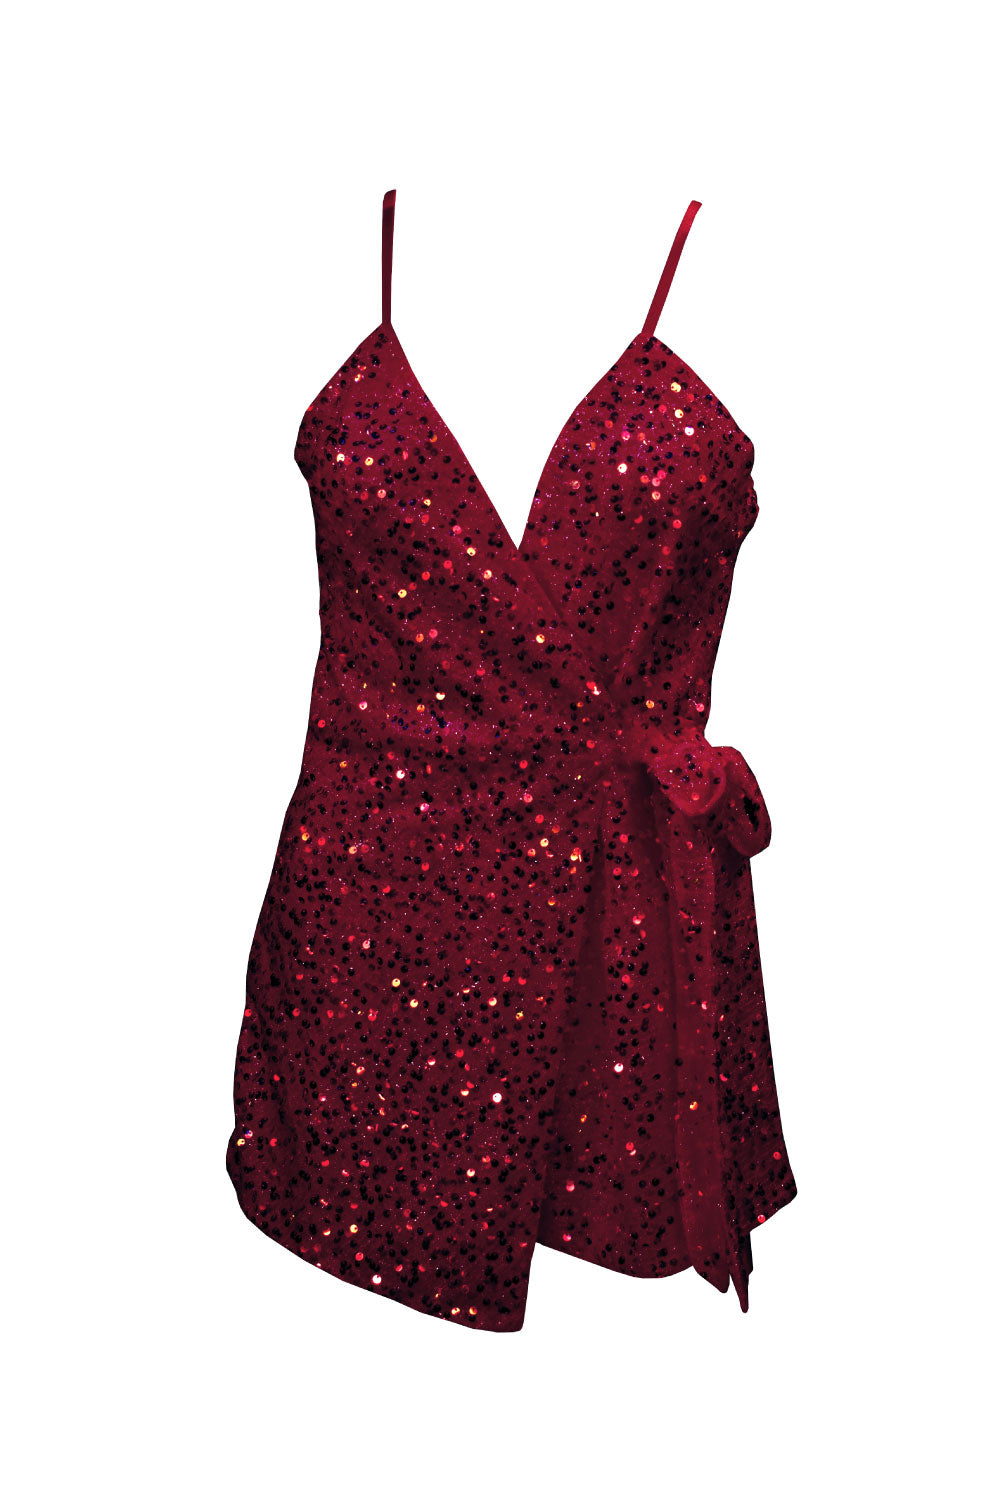 Image of the front of Luxxel's Sequin Wrap Tie-Up Romper in Red.